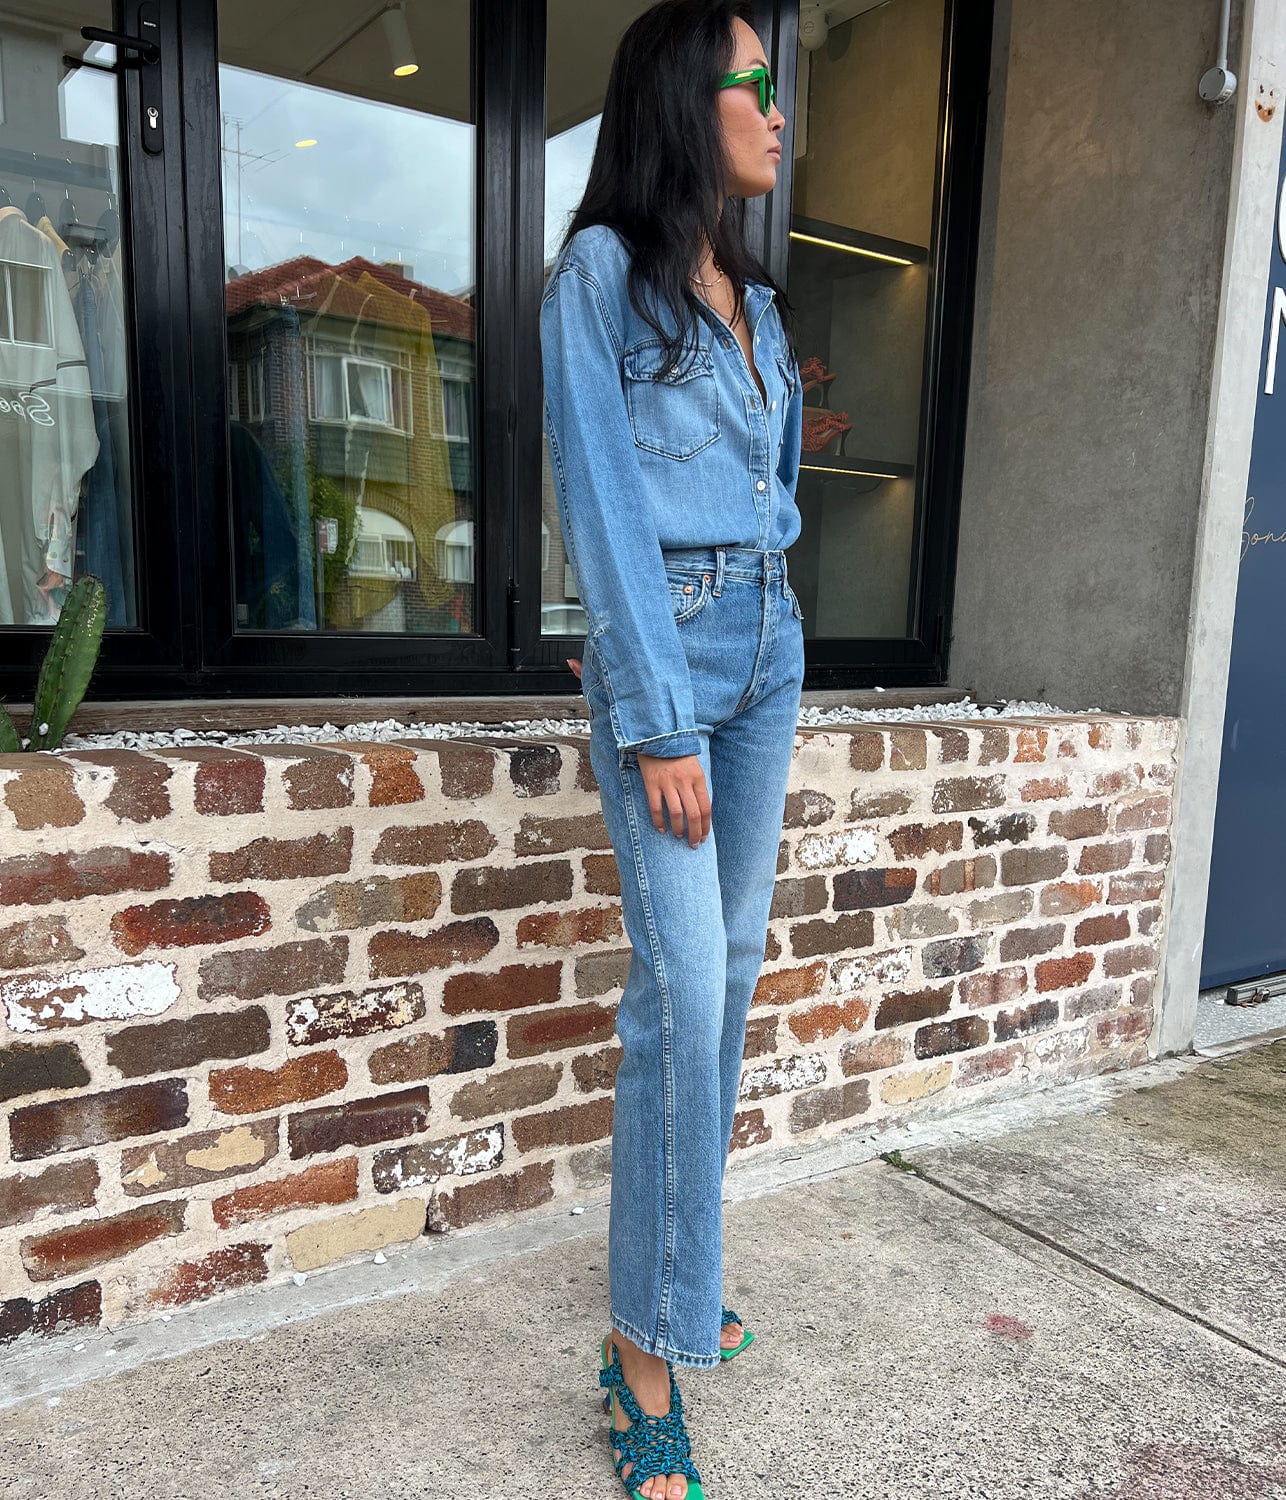 90'S HIGH RISE LOOSE JEANS- WORN BLUE | RE/DONE | RE/DONE 90'S HIGH RISE LOOSE JEANS- WORN BLUE